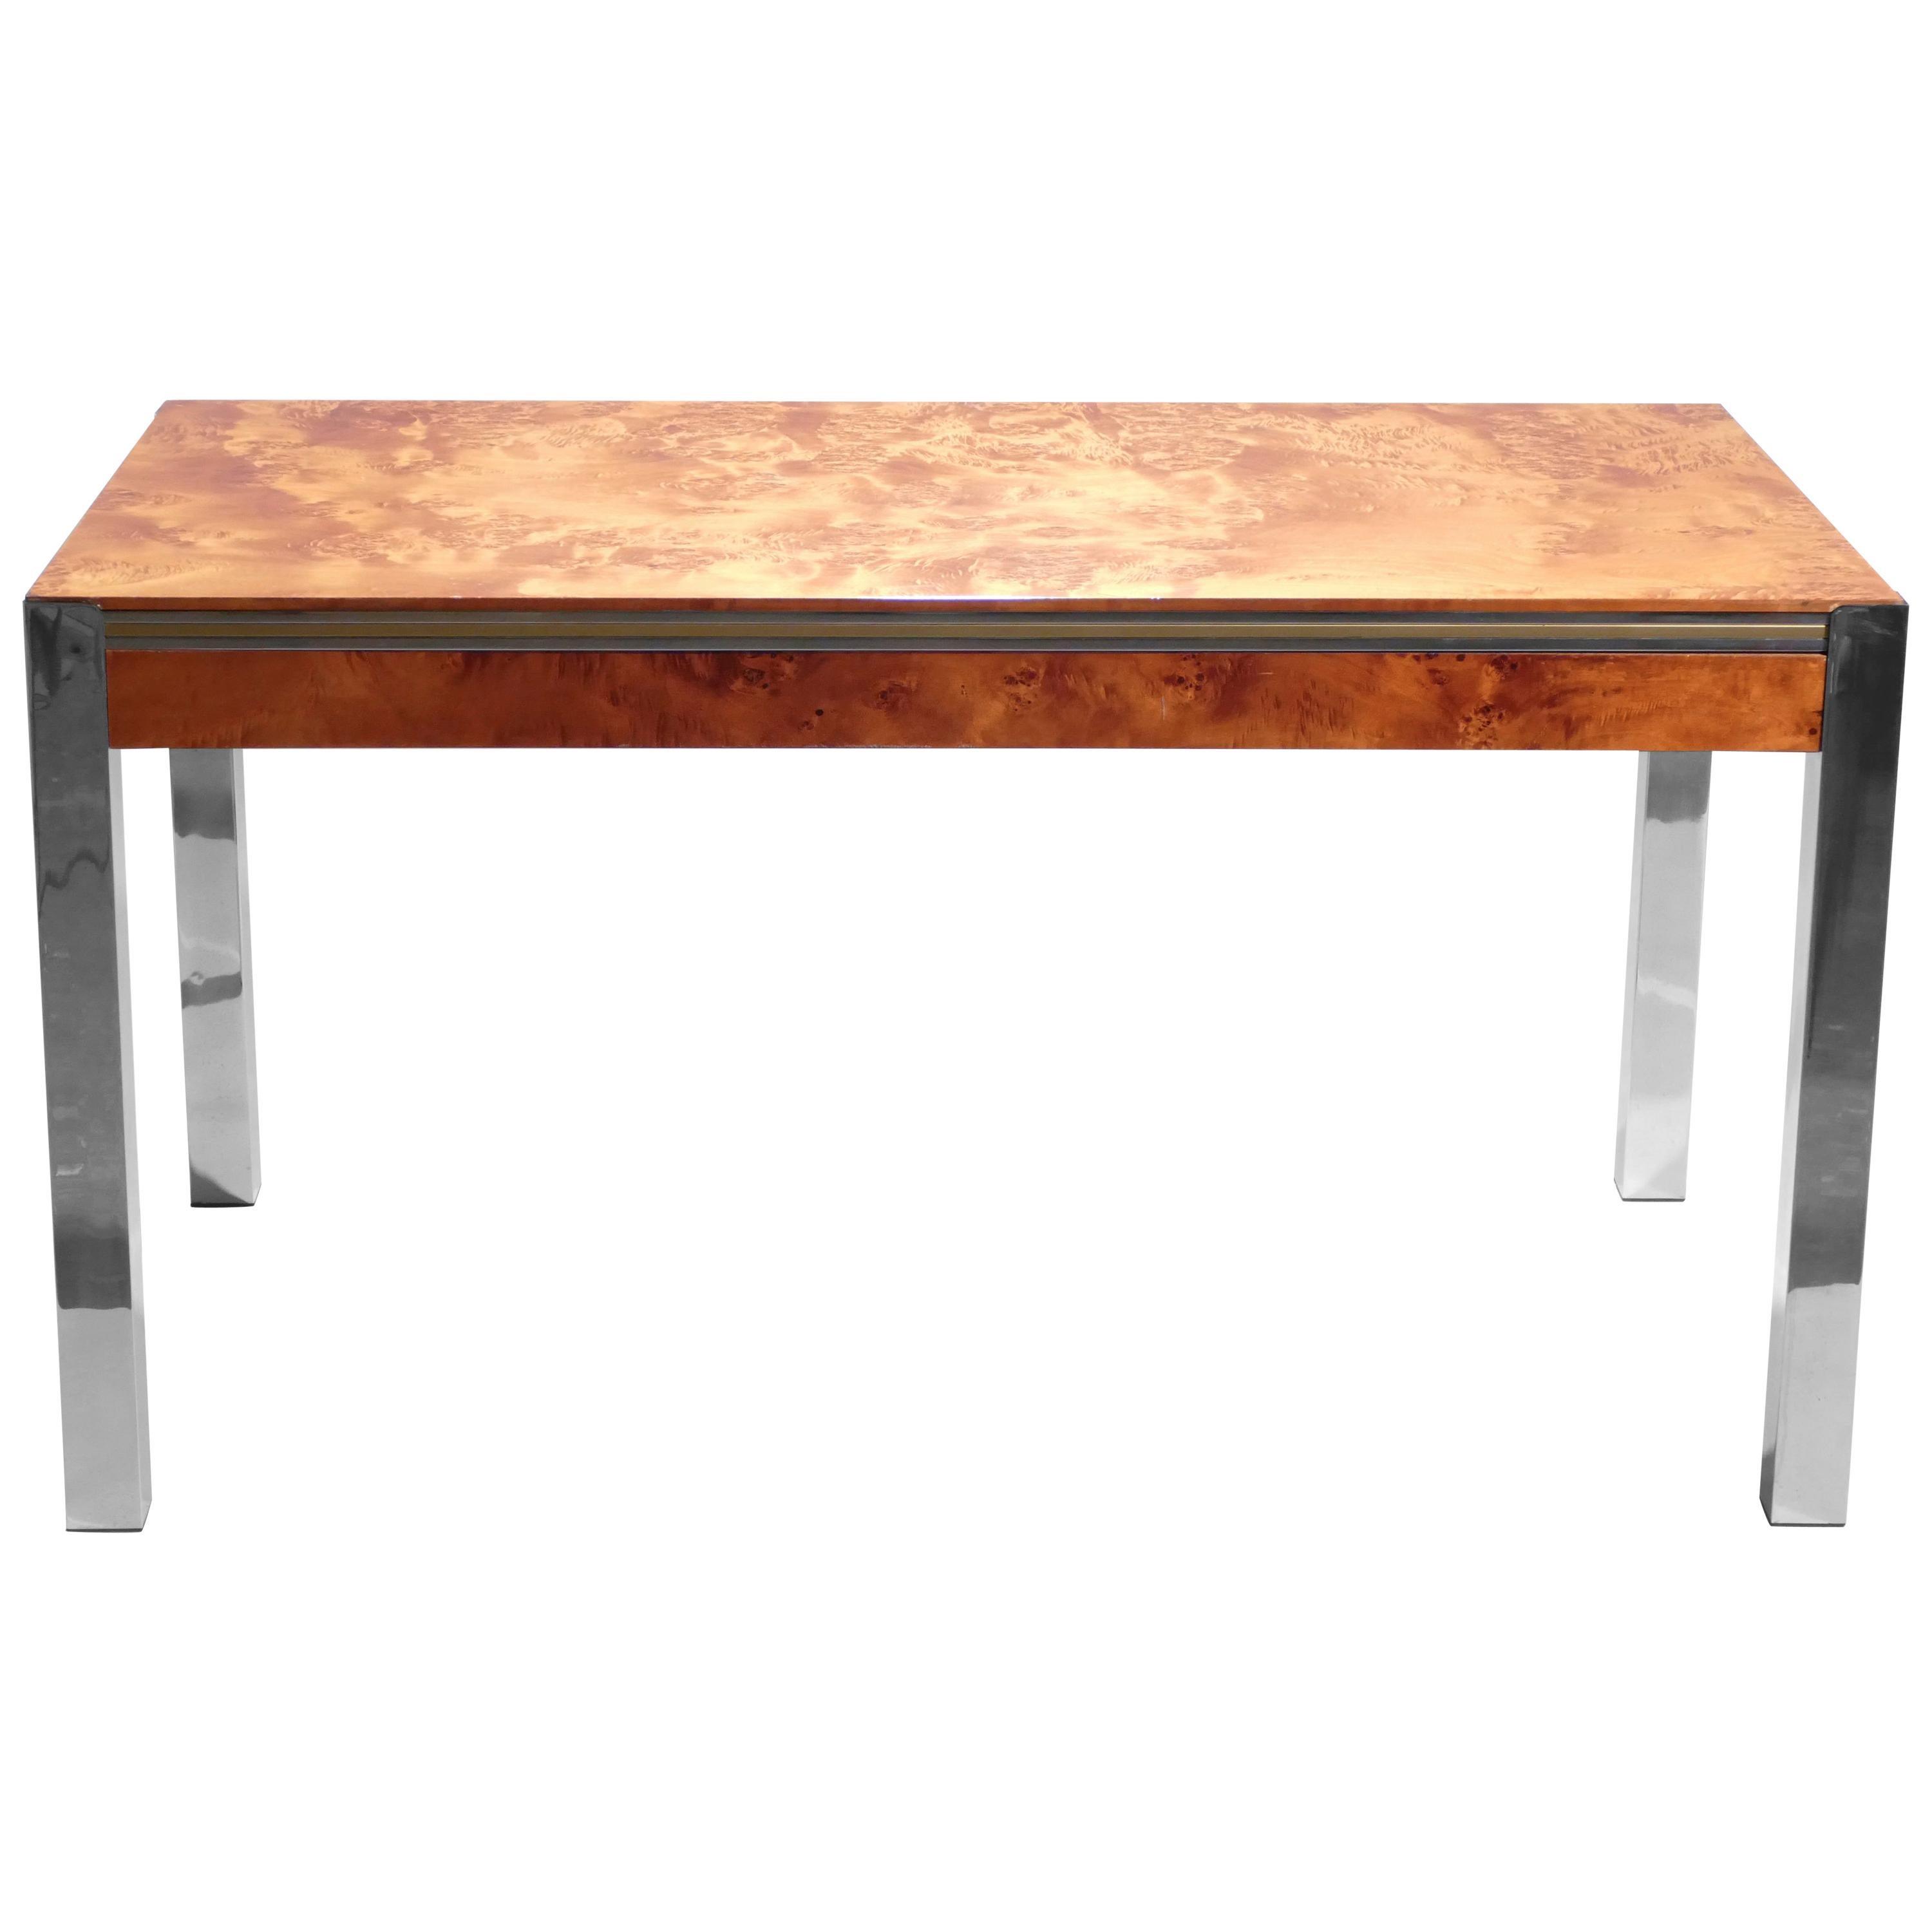 Famed midcentury designer Willy Rizzo often used burl wood in his designs, and it’s not hard to see why in this dining table. The rich material, when lacquered and hit with light, has a remarkably warm and bright appearance. Combined with shiny